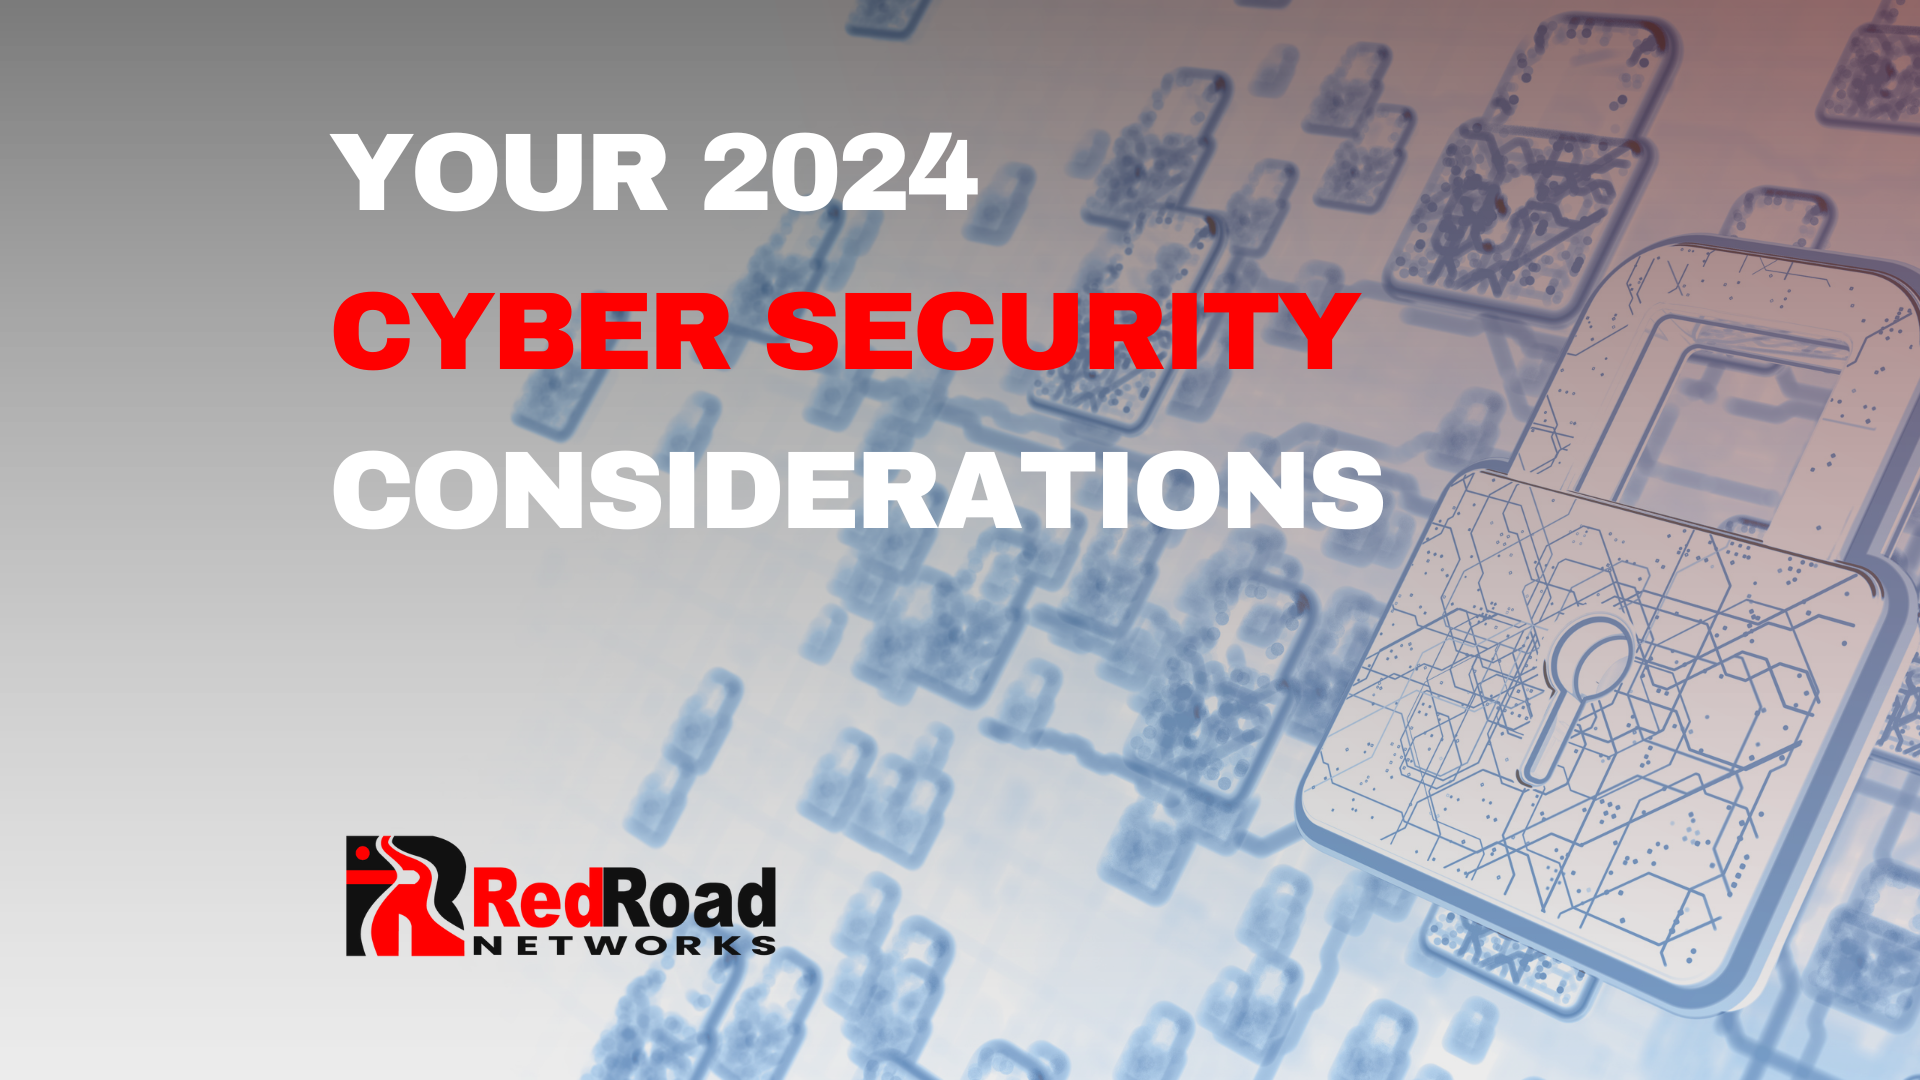 Your 2024 cyber security considerations